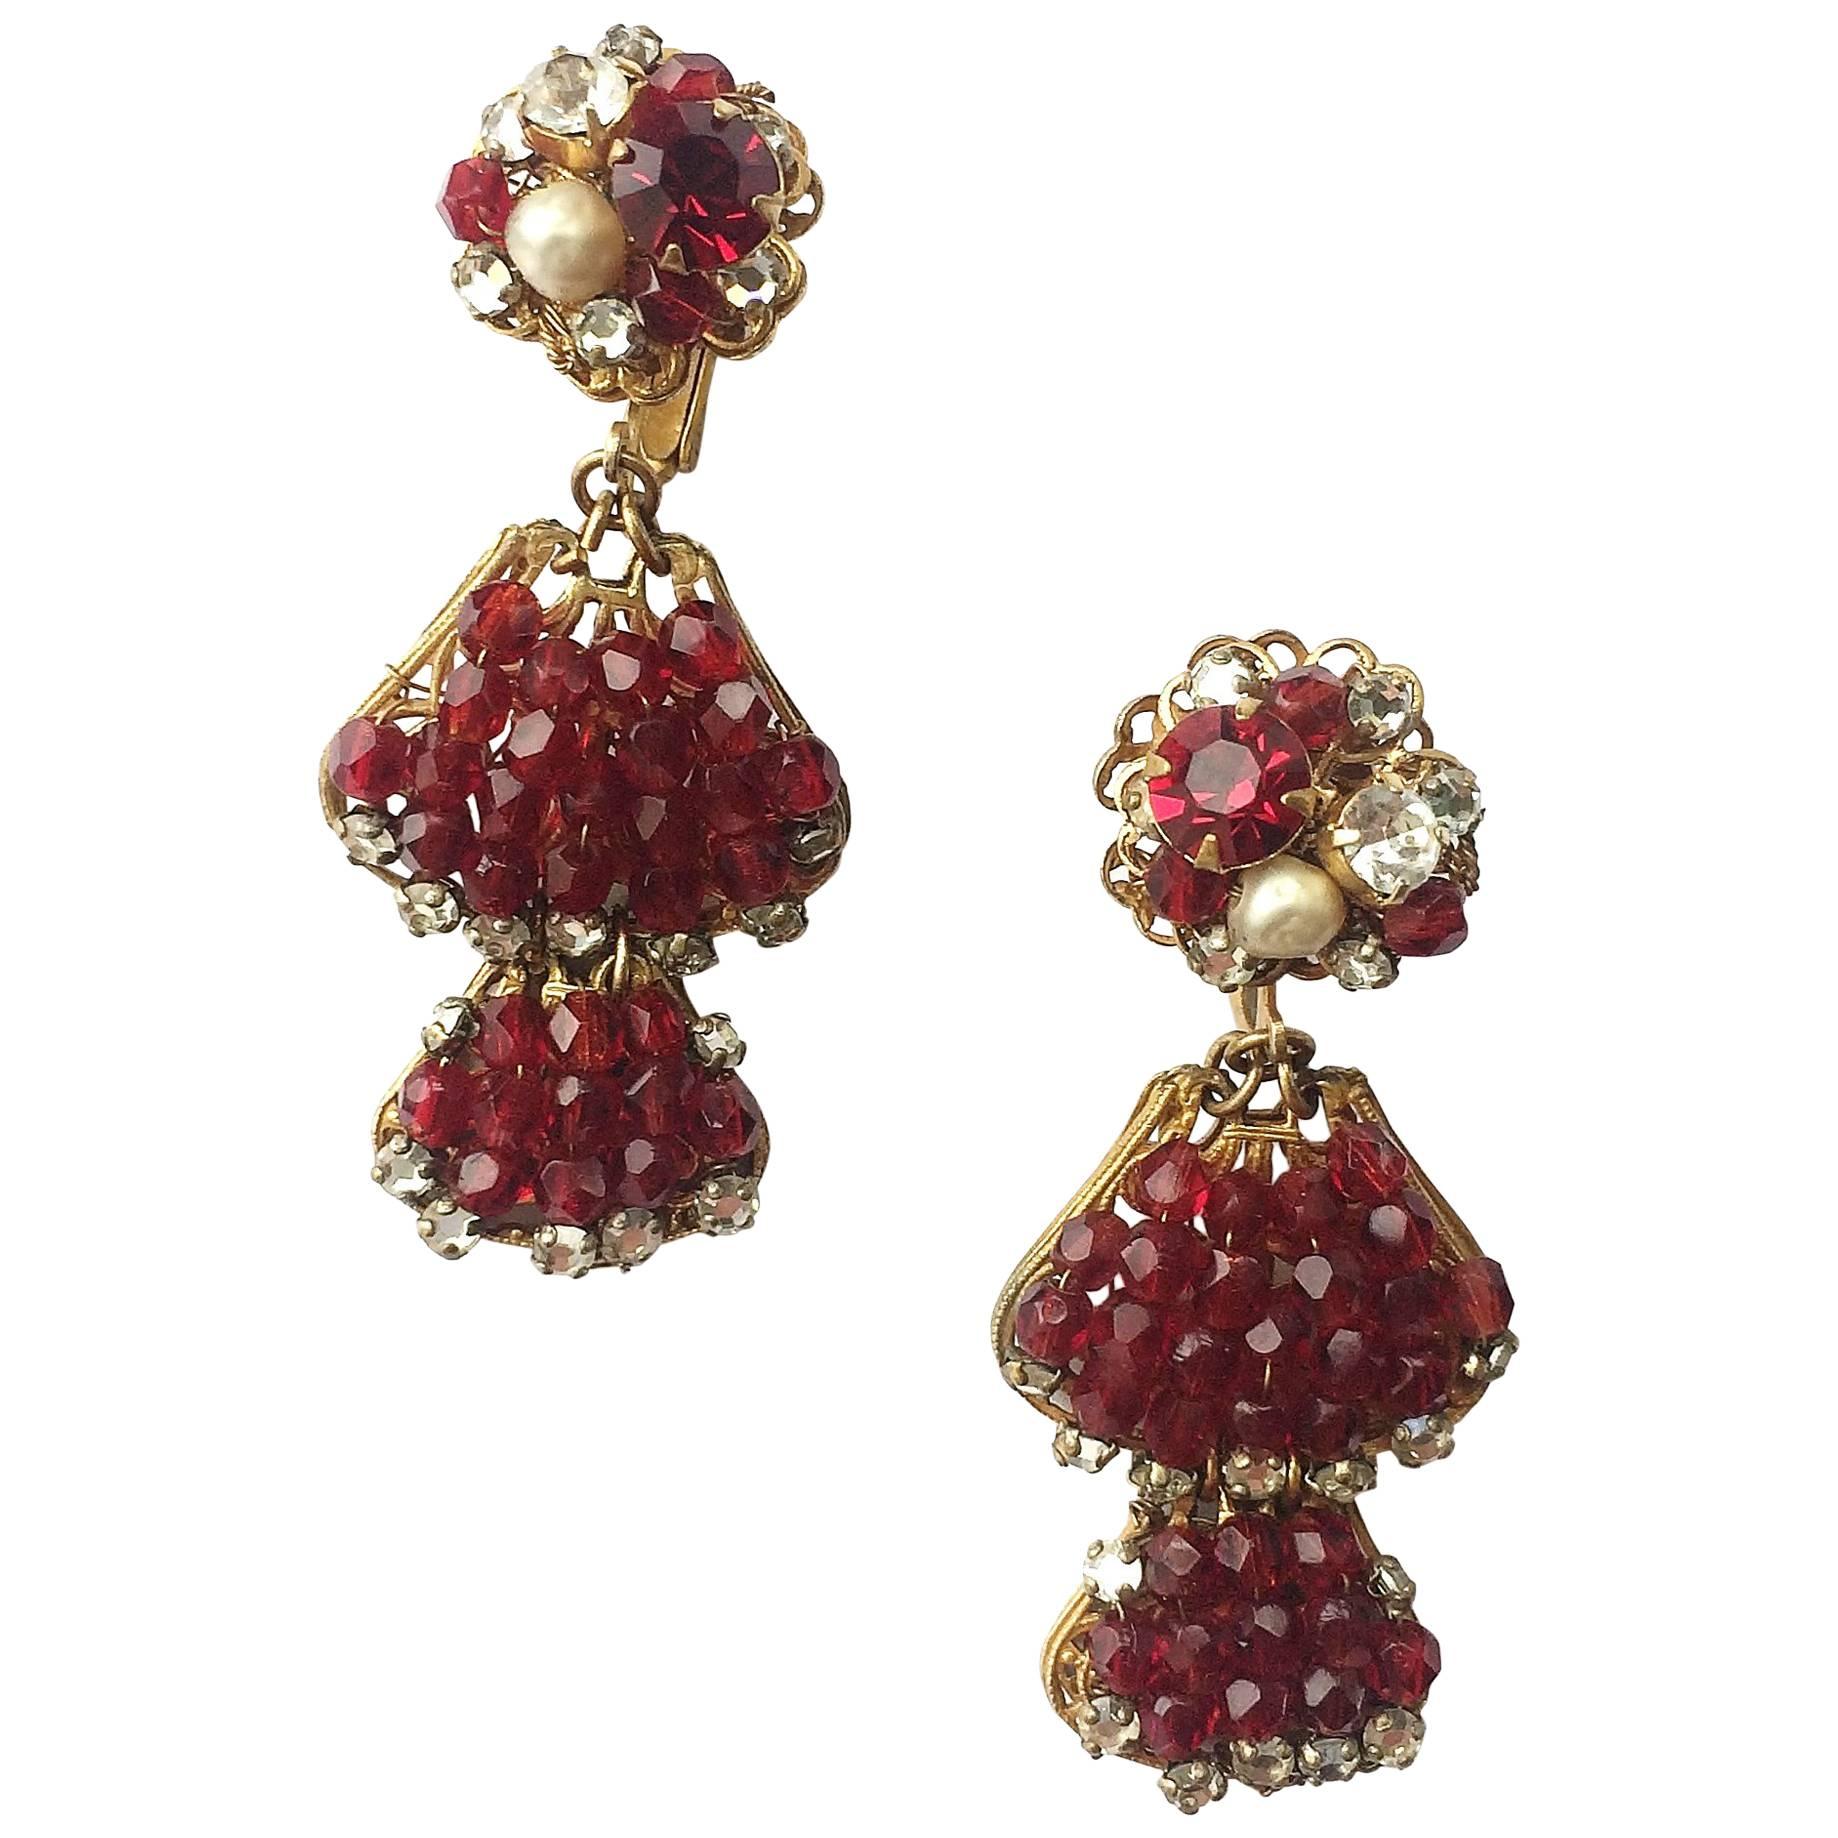 Ruby bead, rose montes and pearl drop earrings, De Mario, 1950s